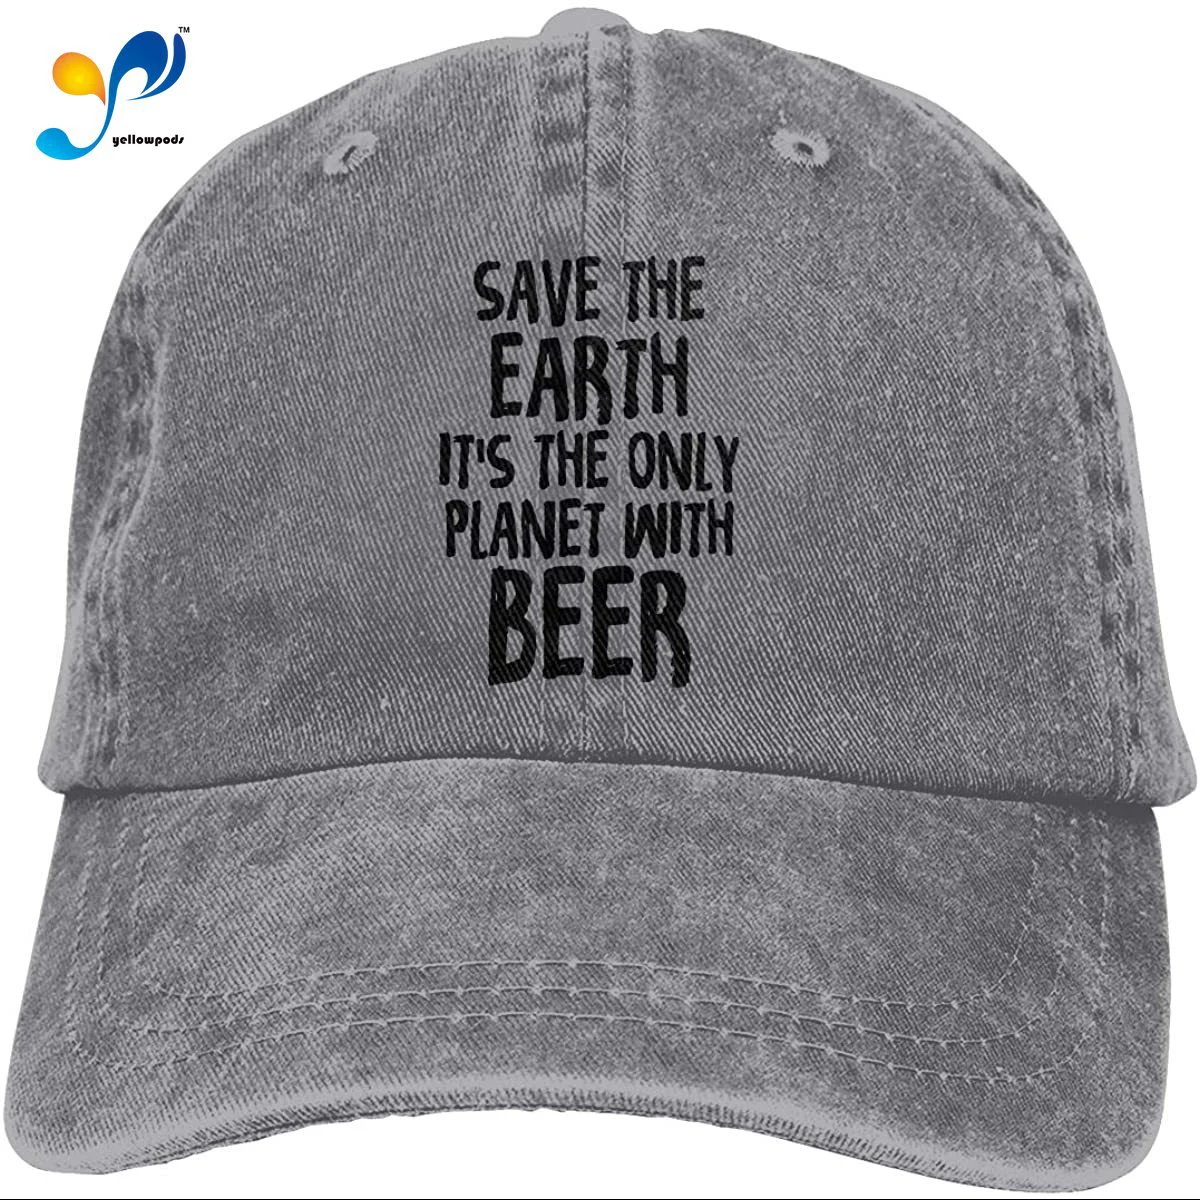 

Save The Earth It's The Only Planet With Beer1 Washed Twill Baseball Cap Adjustable Hats Humor Irony Graphics Of Adult Gift Gray